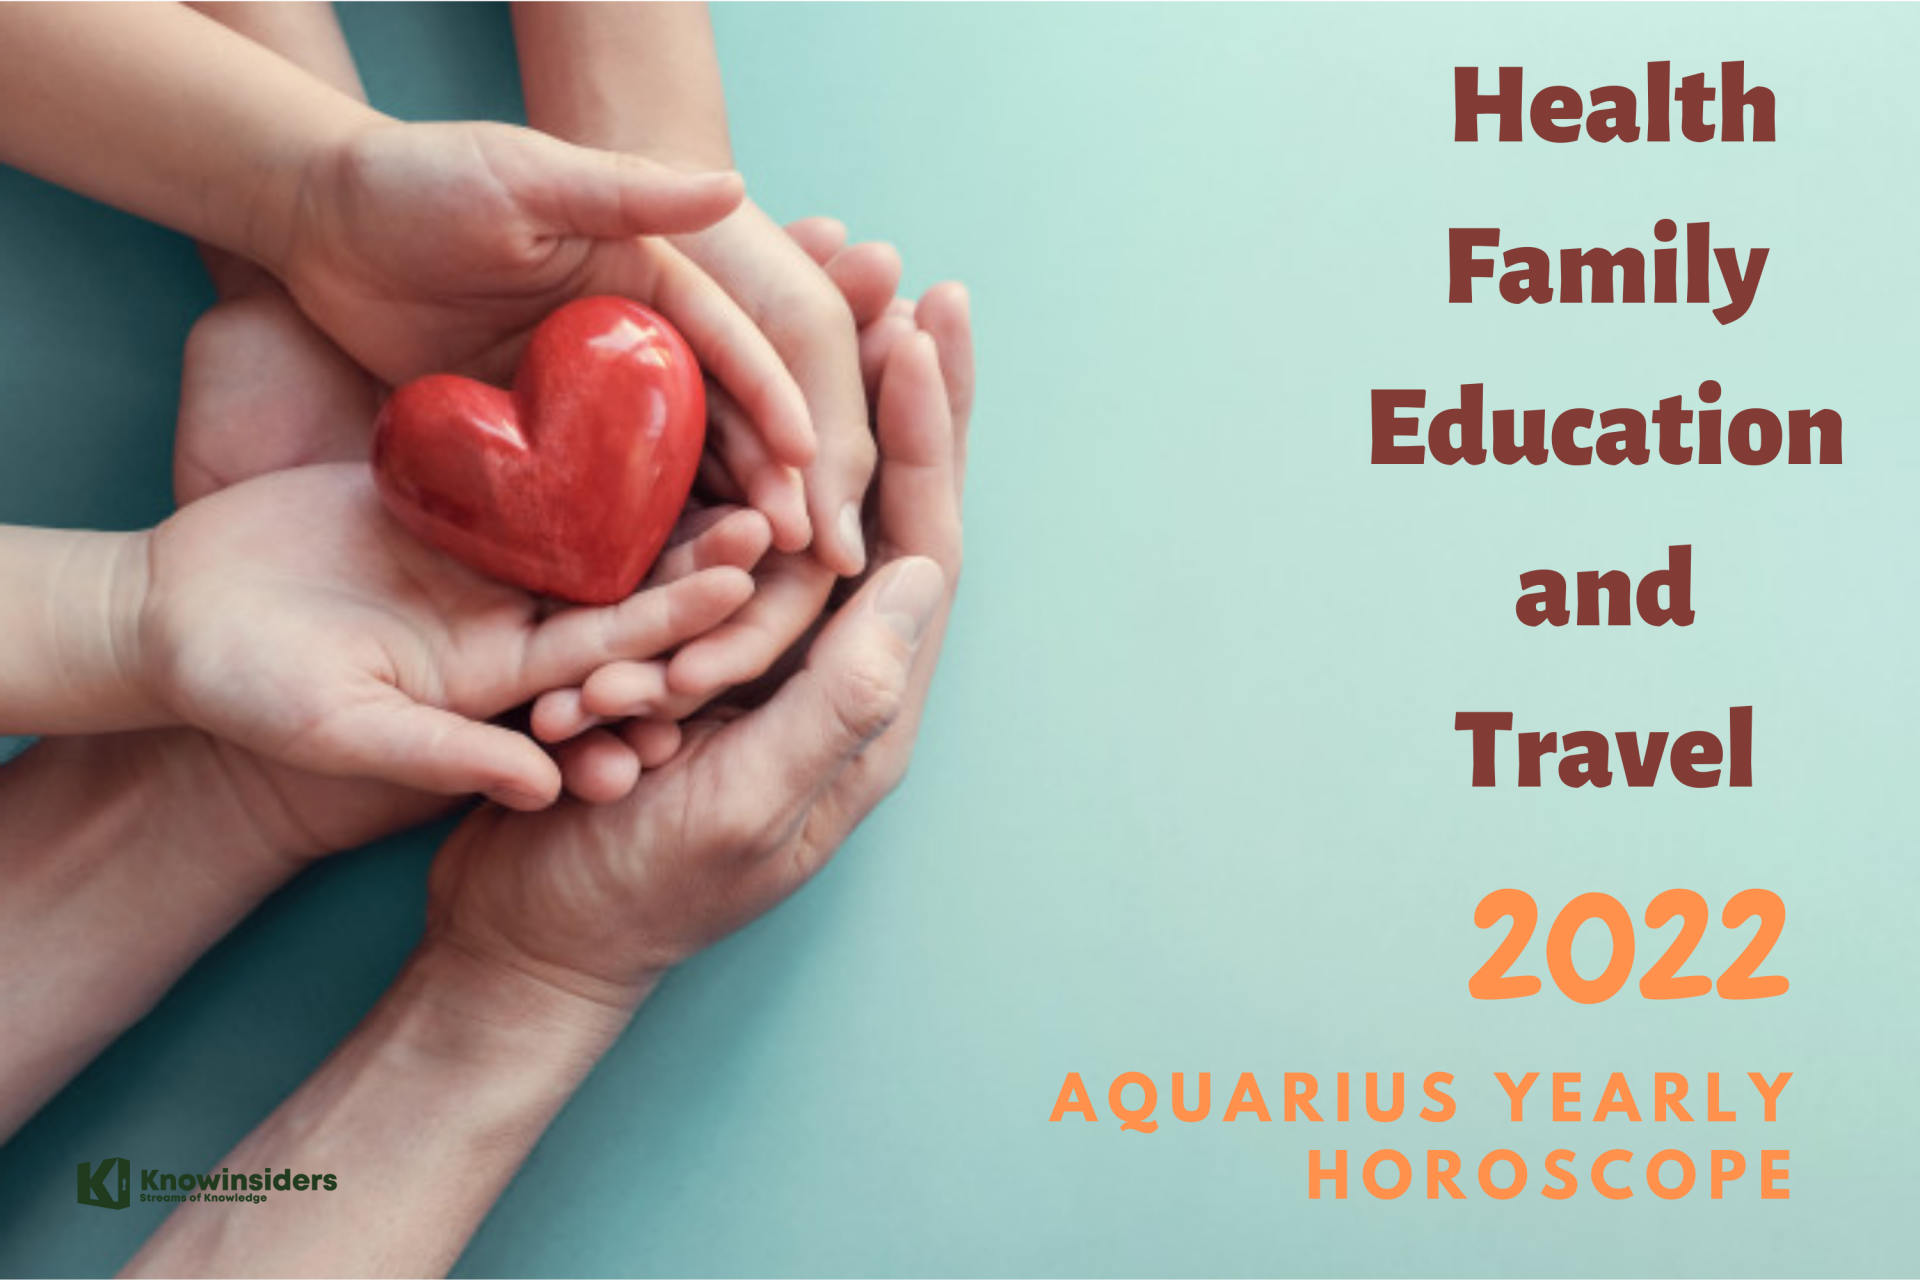 AQUARIUS Yearly Horoscope 2022: Predictions for Health, Family, Education and Travel